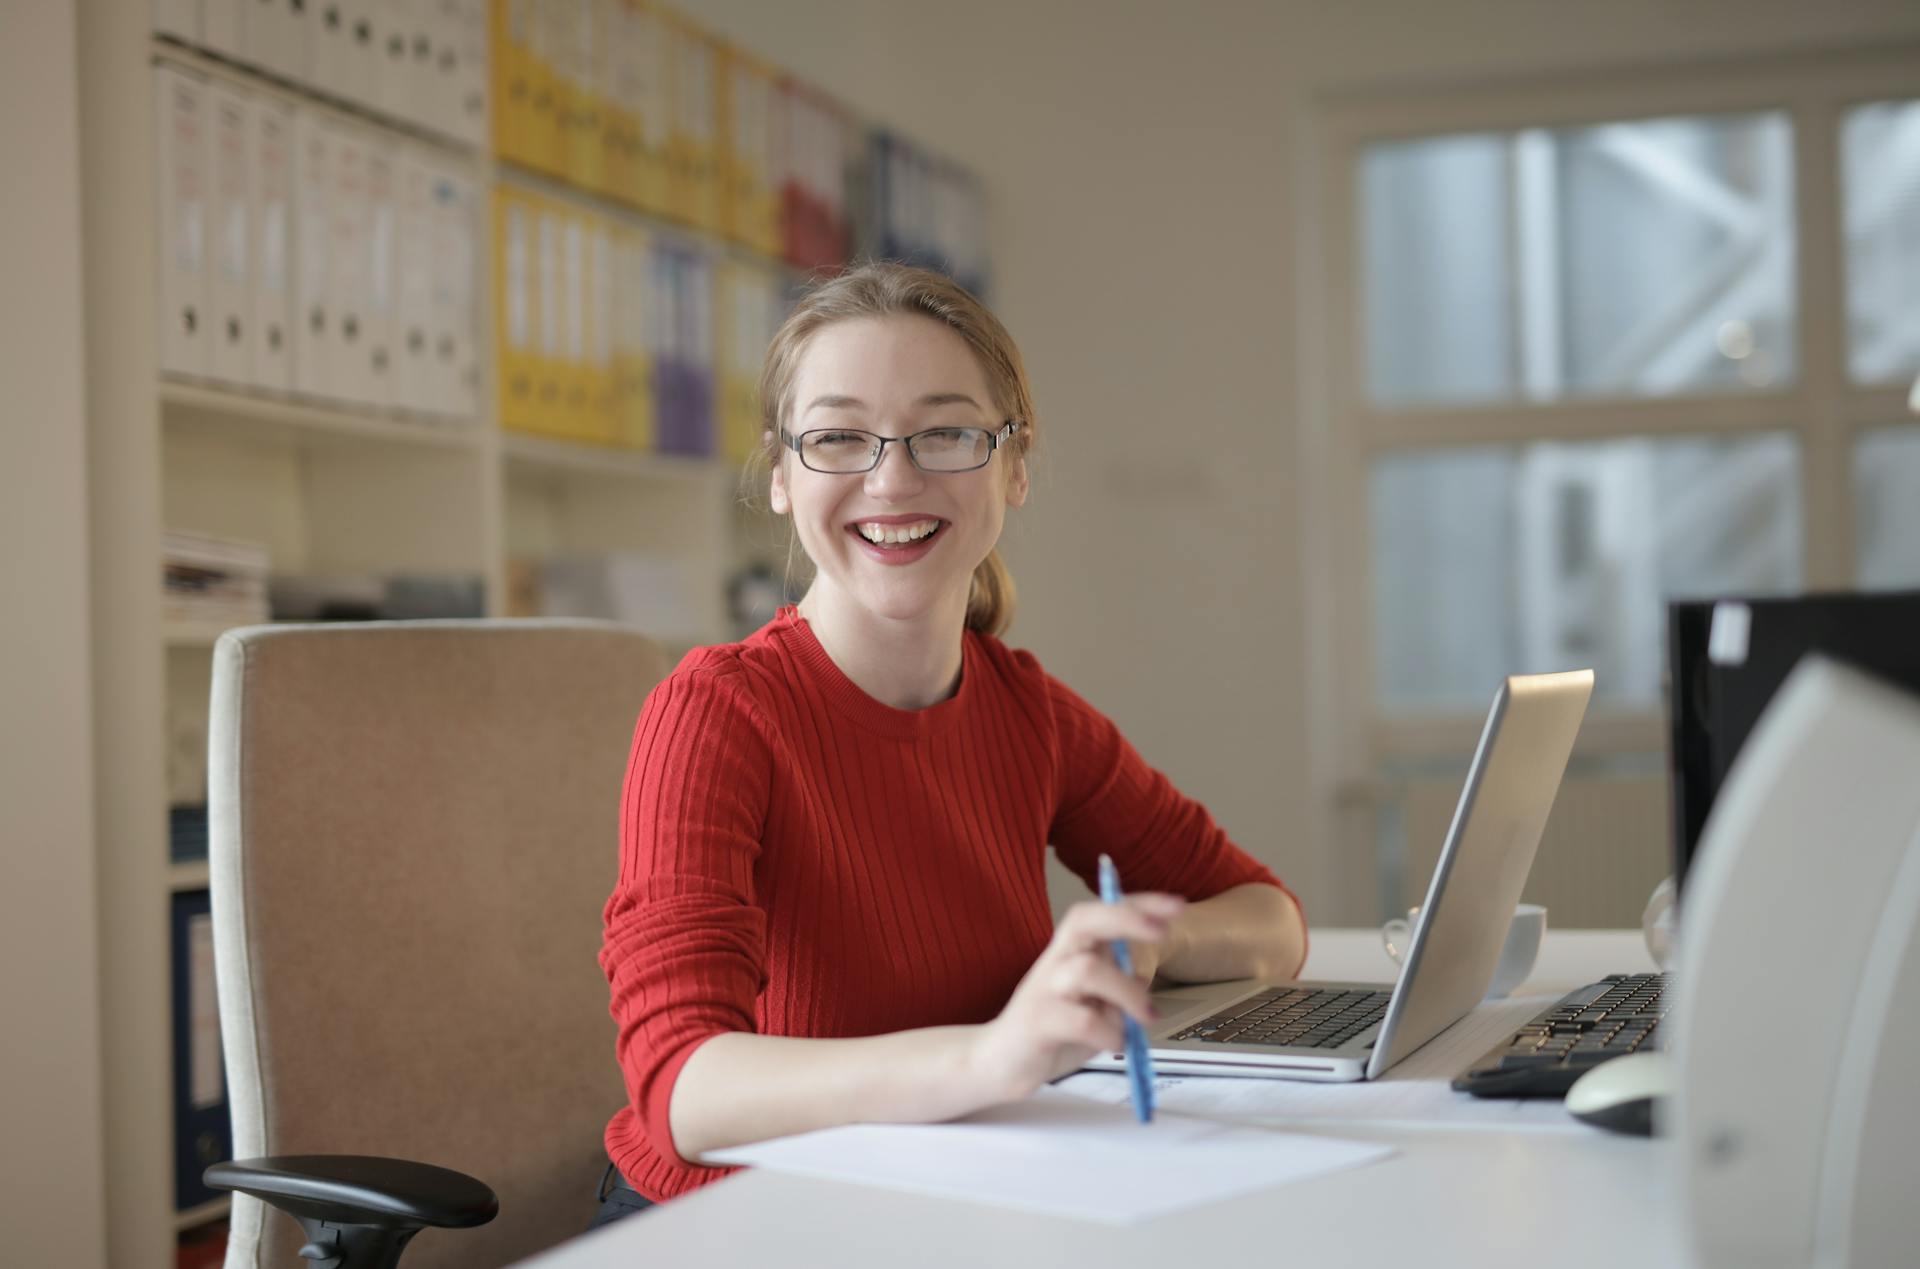 A woman in a red sweater leaning on a table while working | Source: Pexels